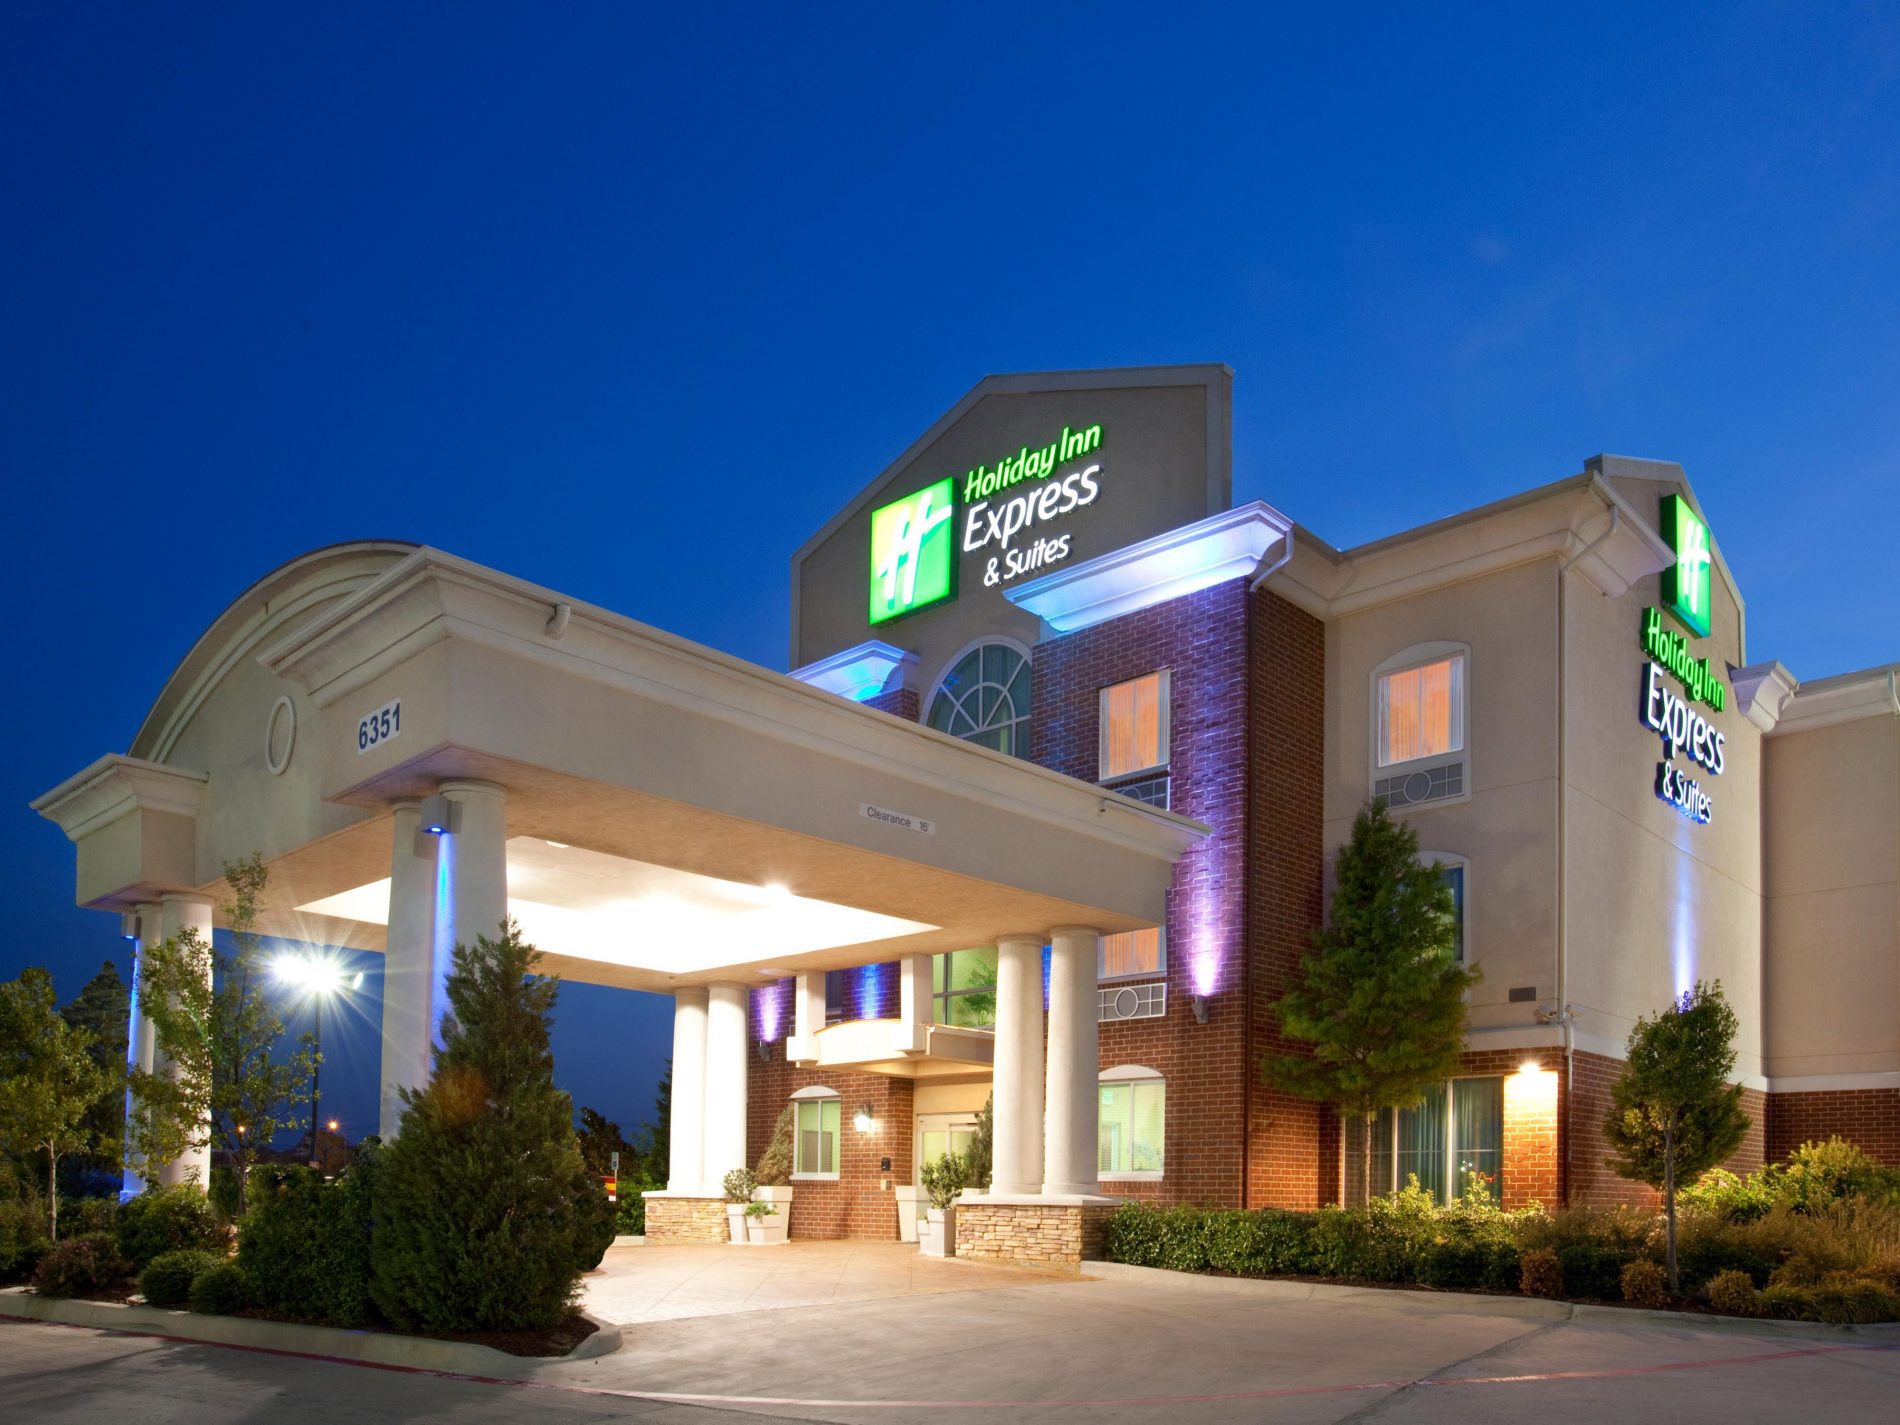 Holiday Inn Express & Suites Fort Worth I-35 Western Center